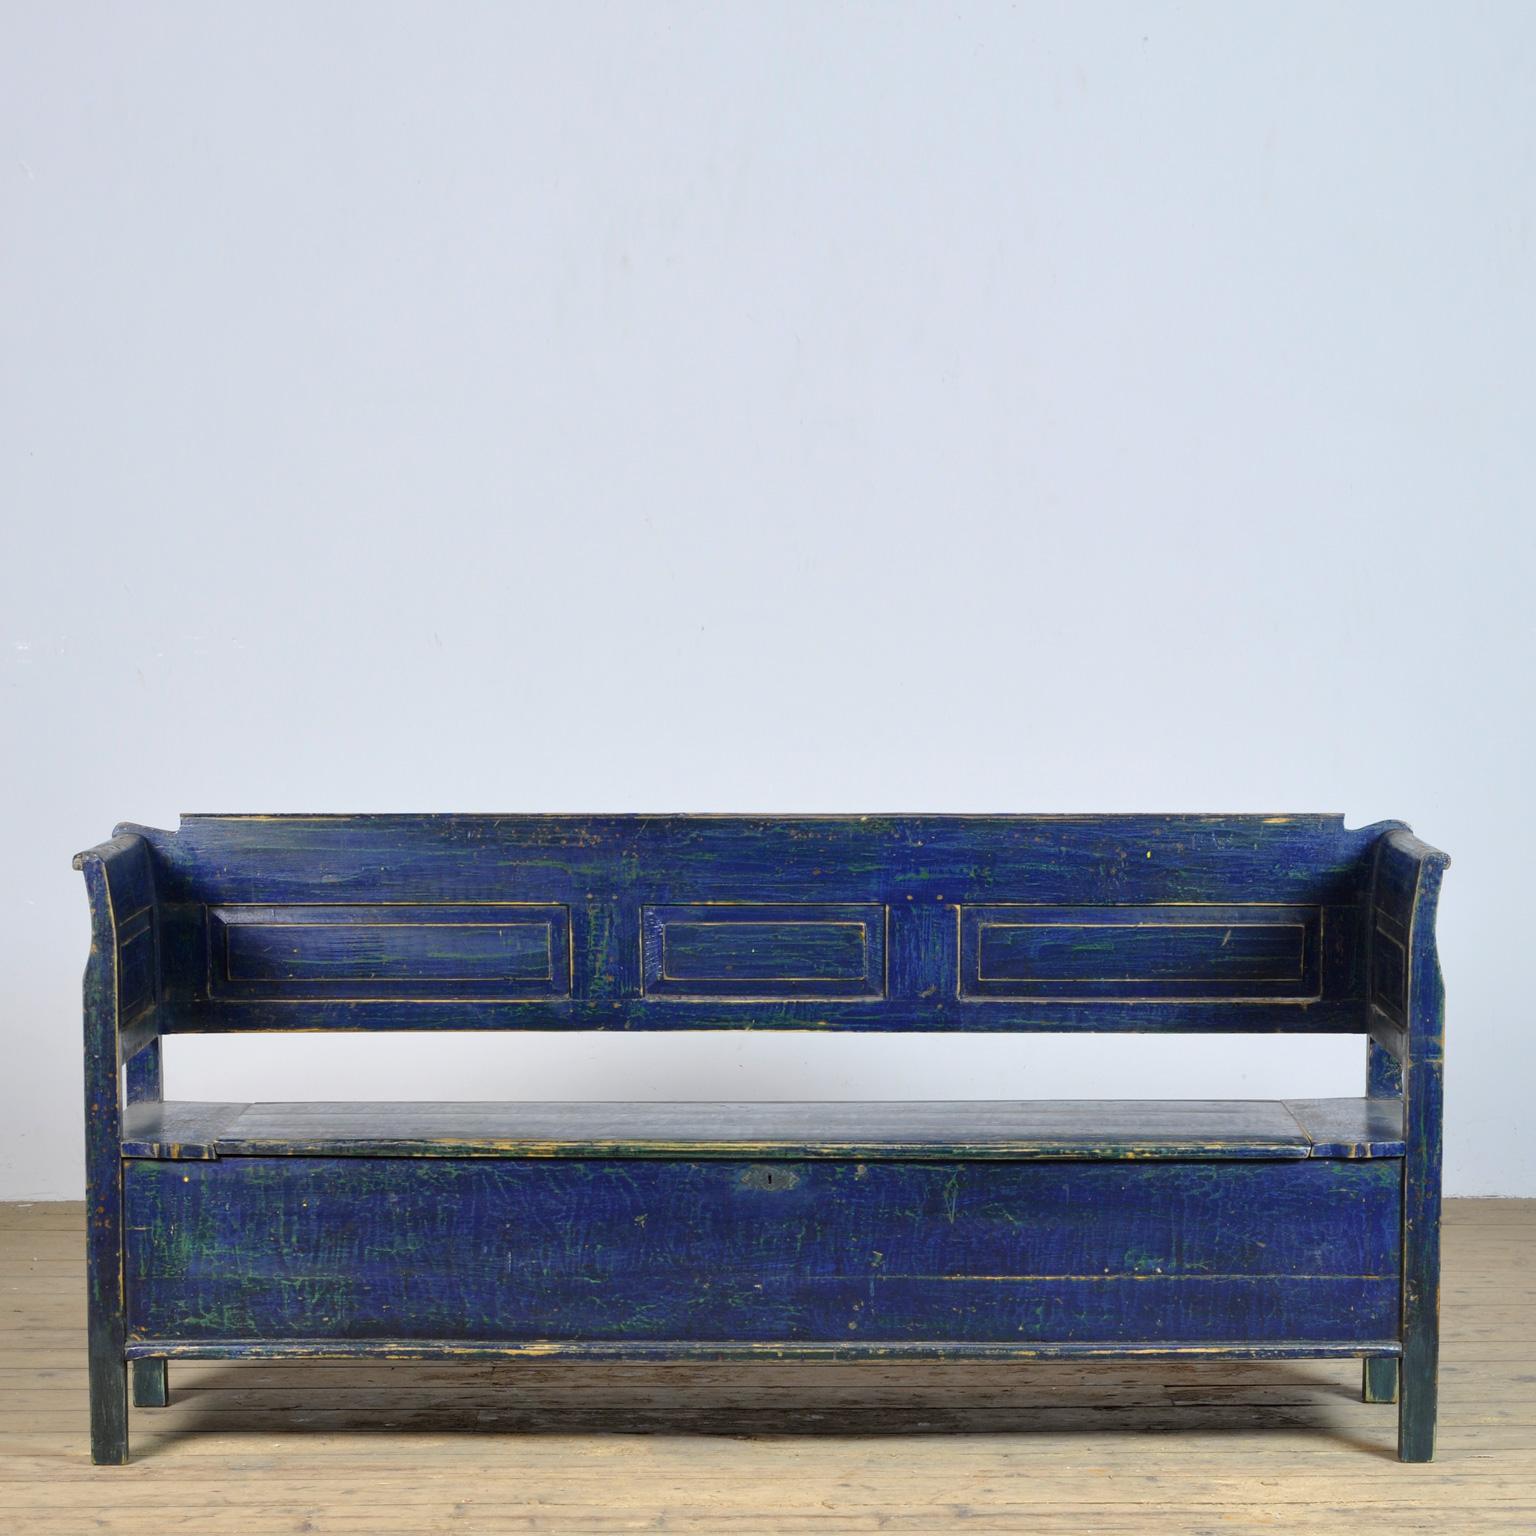 A charming bench from hungary with the original paint. Over time and use, the blue paint has been worn away in places to the wood. The bench is stable and sturdy. Free of woodworm.